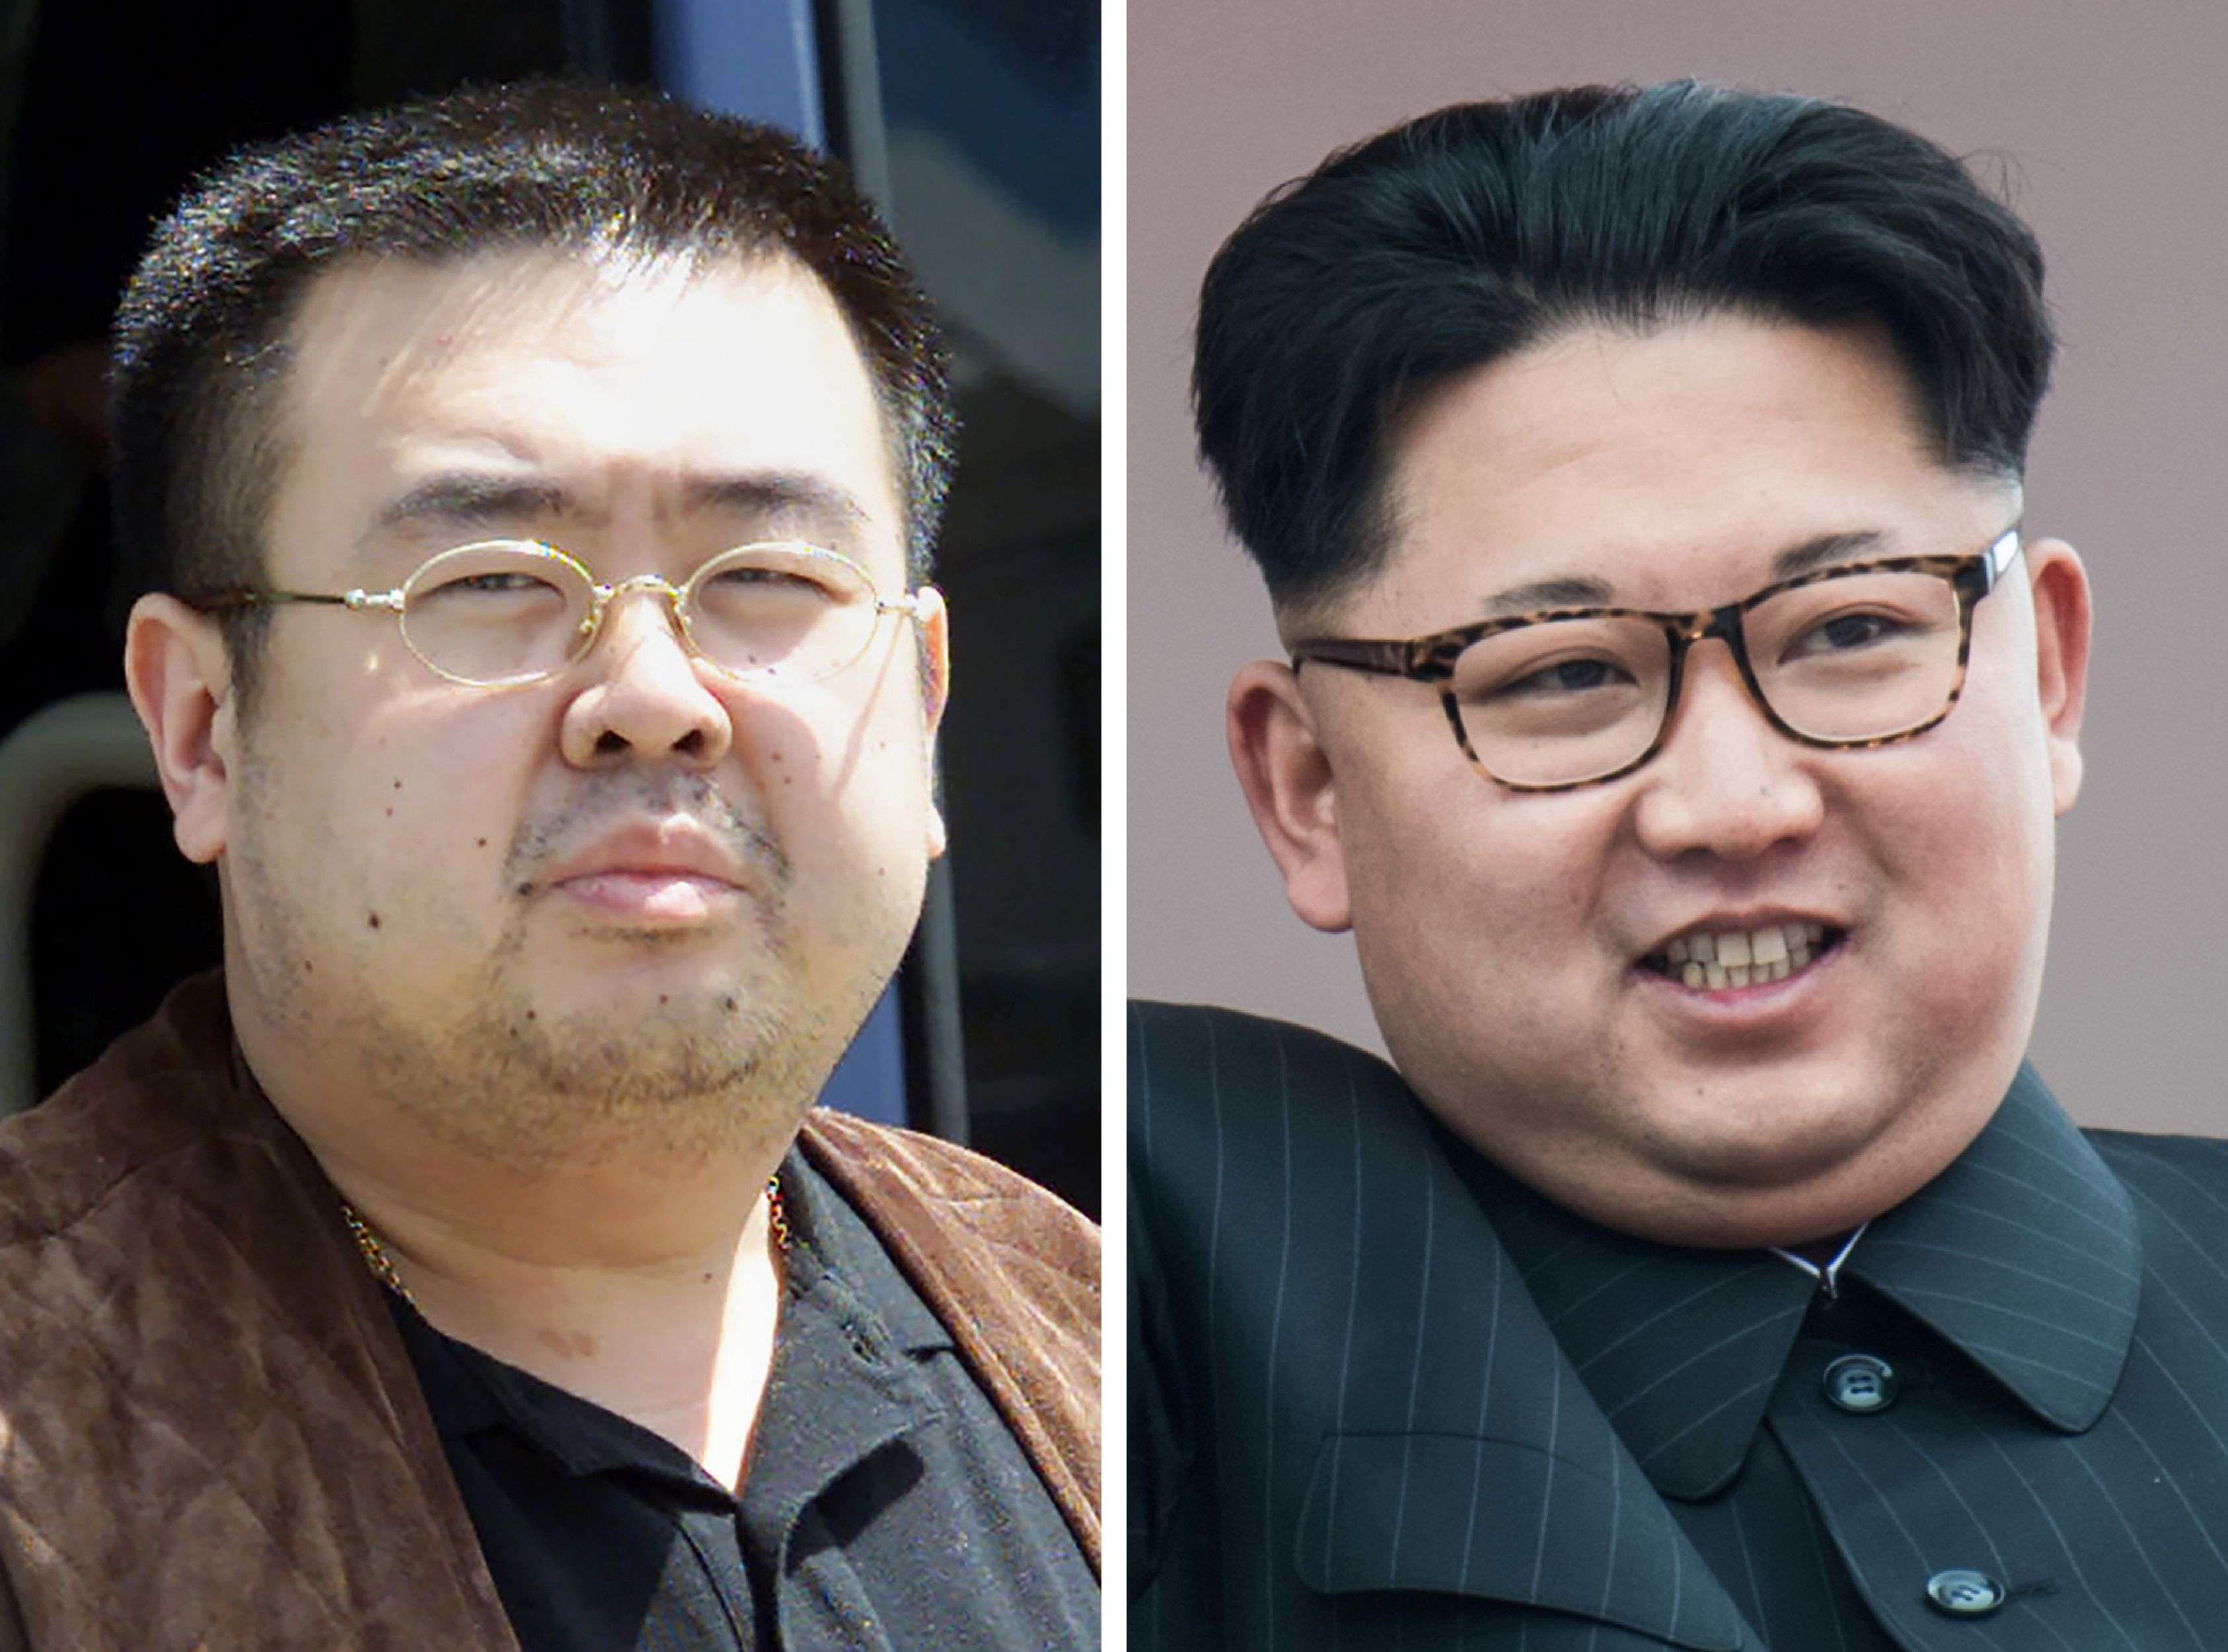 Kim Jong-un debuts new haircut and gets compared to SpongeBob SquarePants |  Daily Mail Online